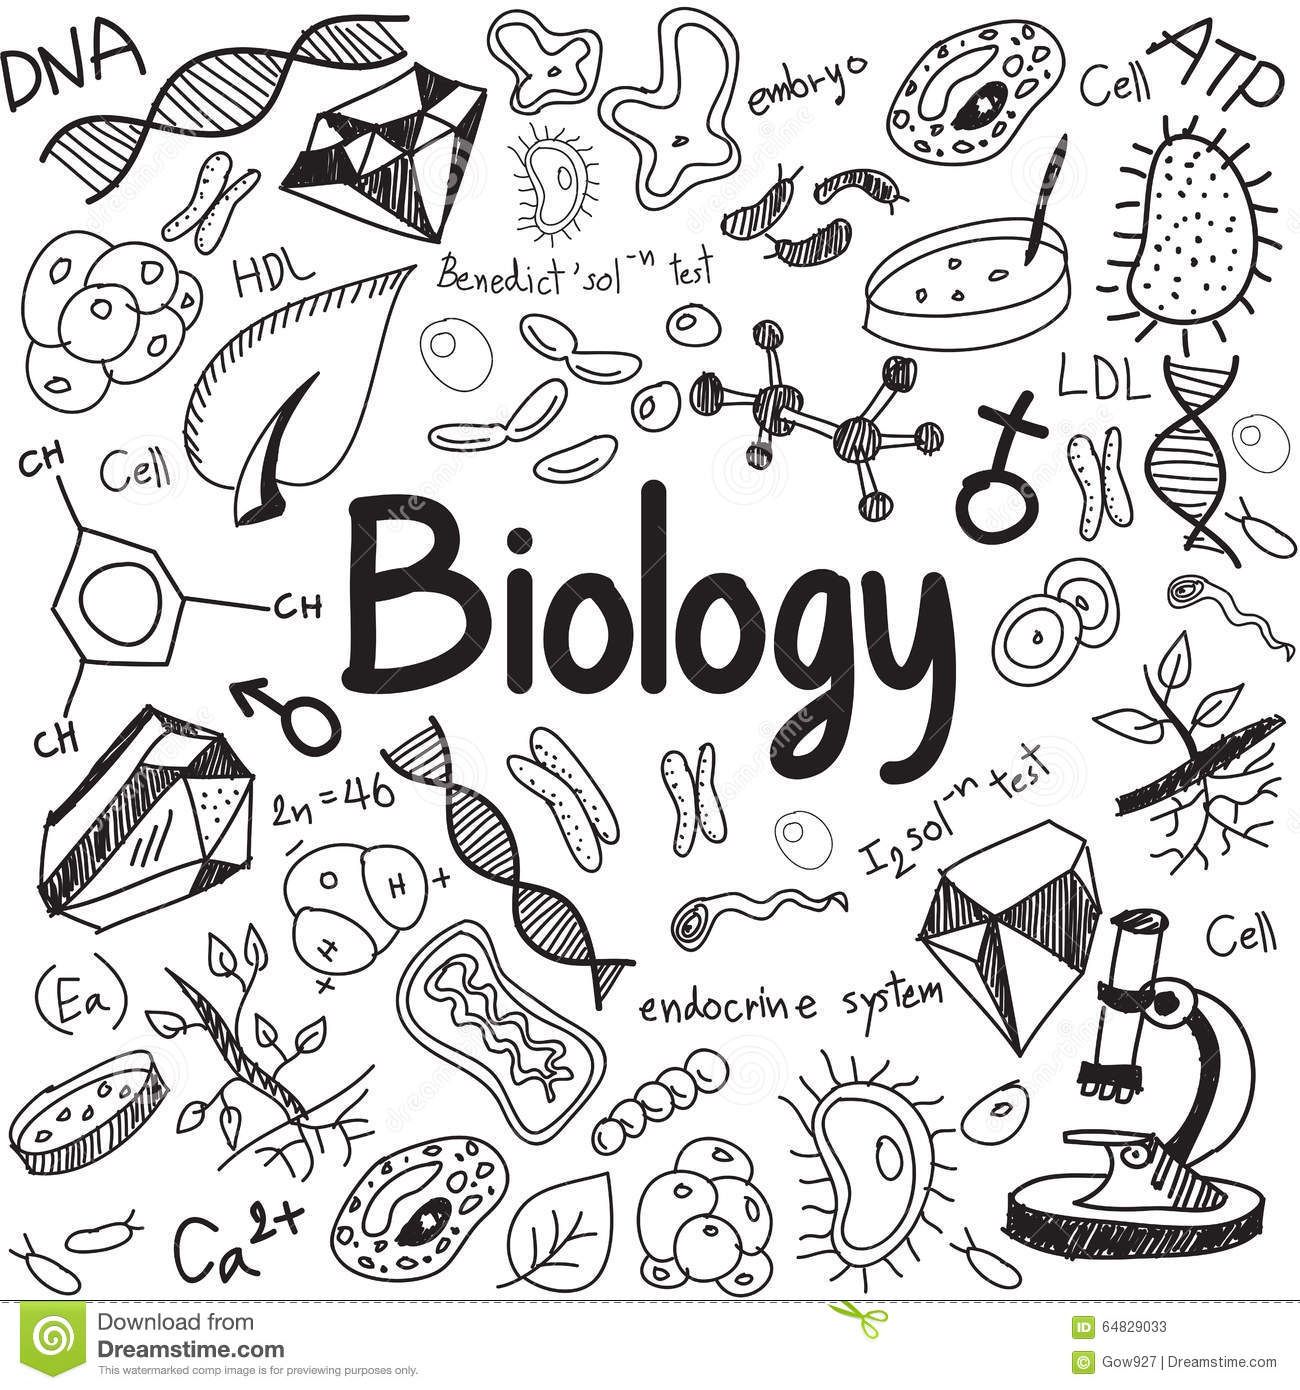 best biology drawing software free download